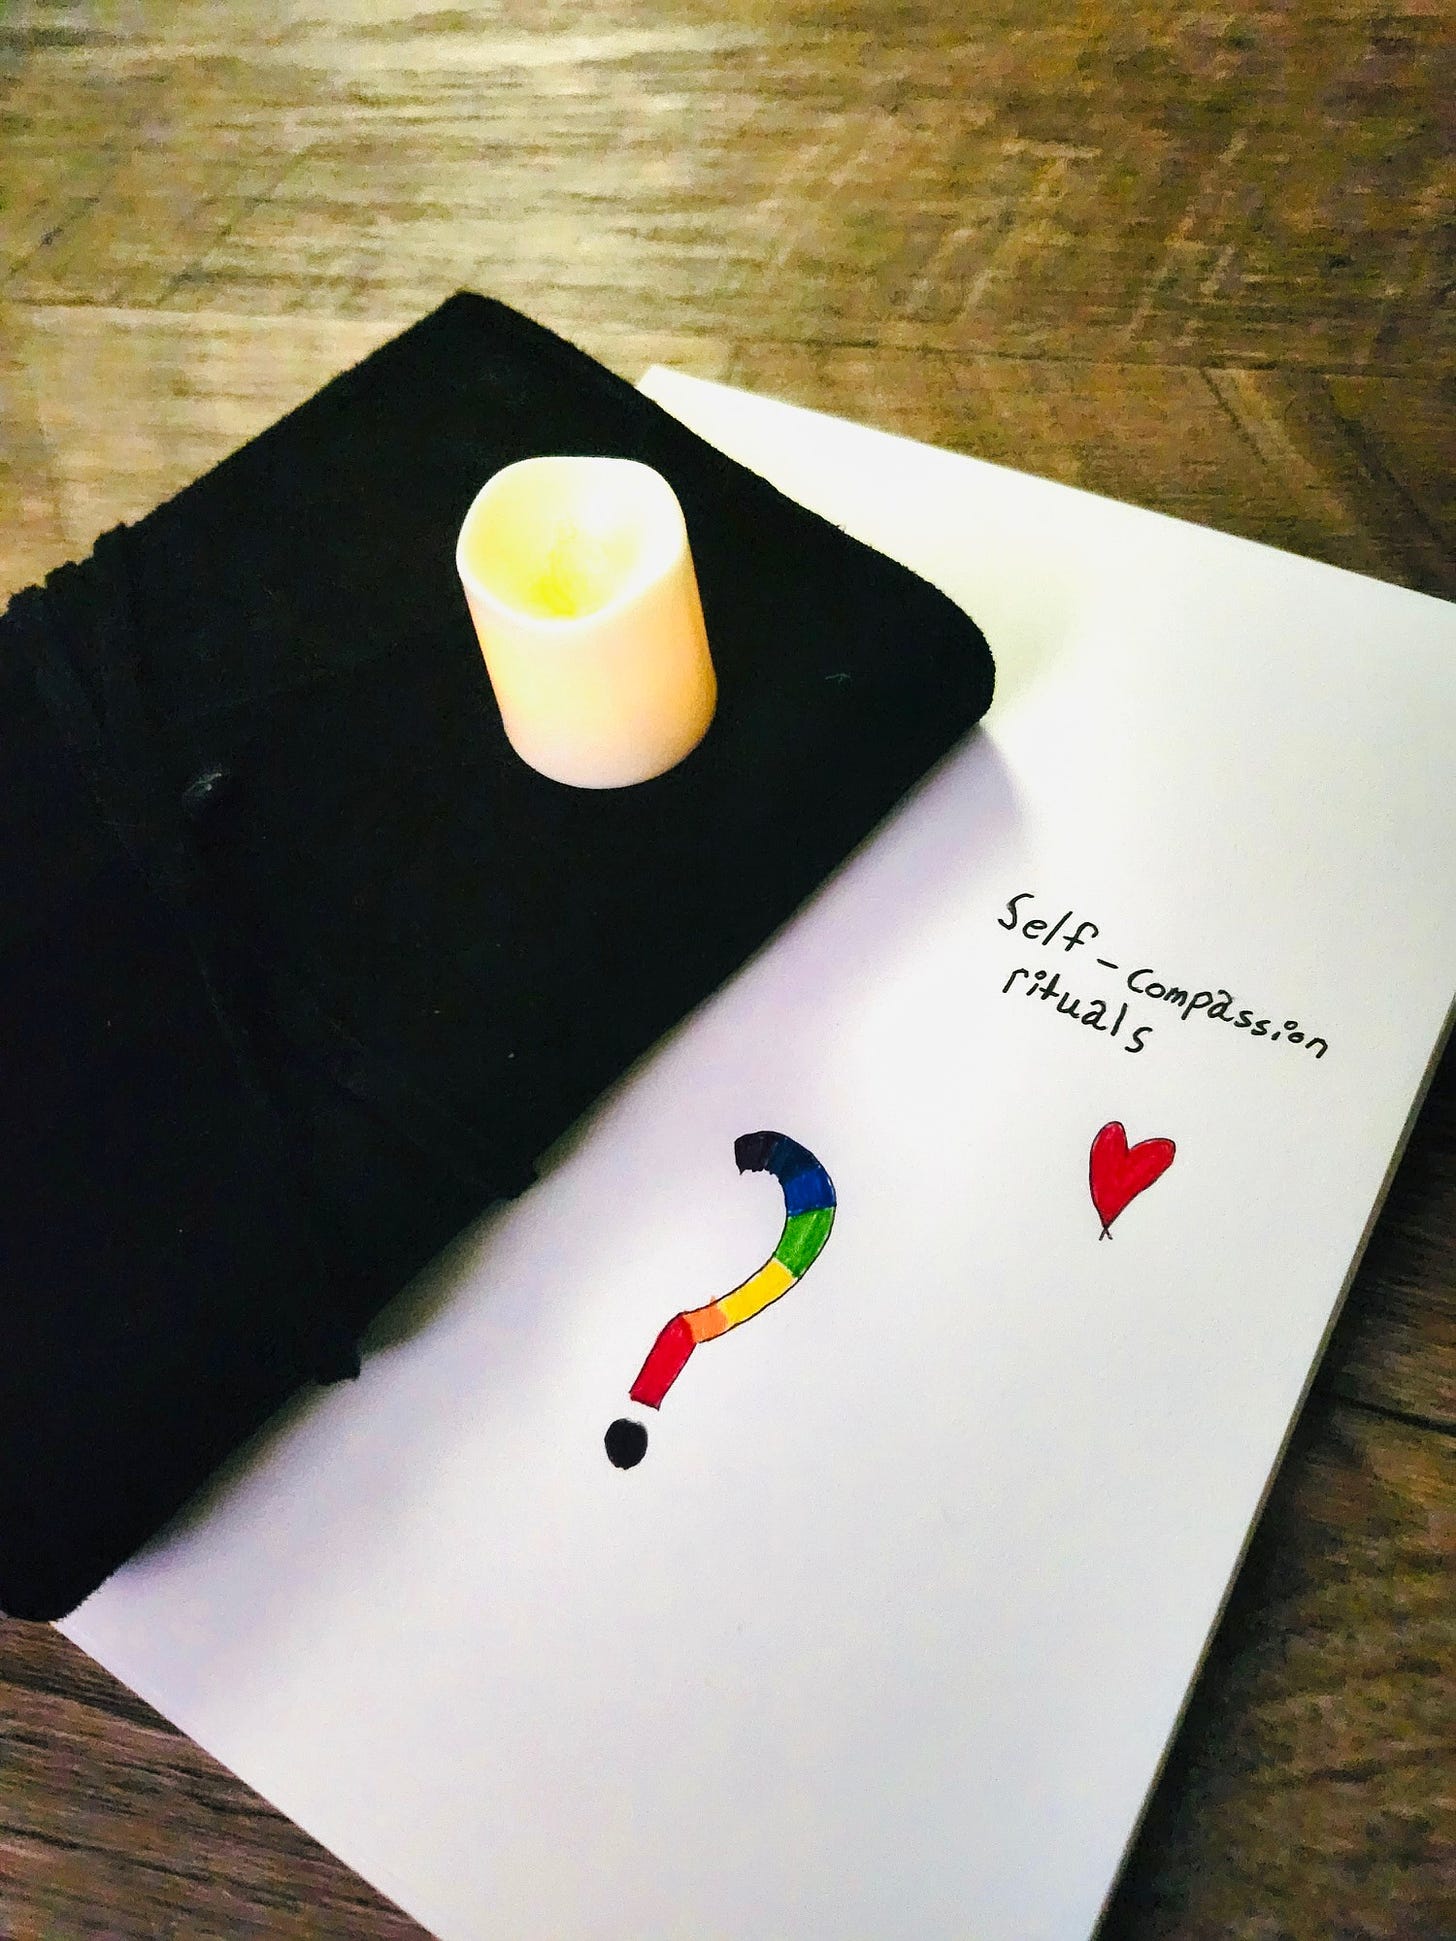 "Art journal page that says 'Self-compassion rituals,' featuring doodles of a rainbow question mark and a heart. Sitting on top of the art journal are a white LED candle and a black leather journal.